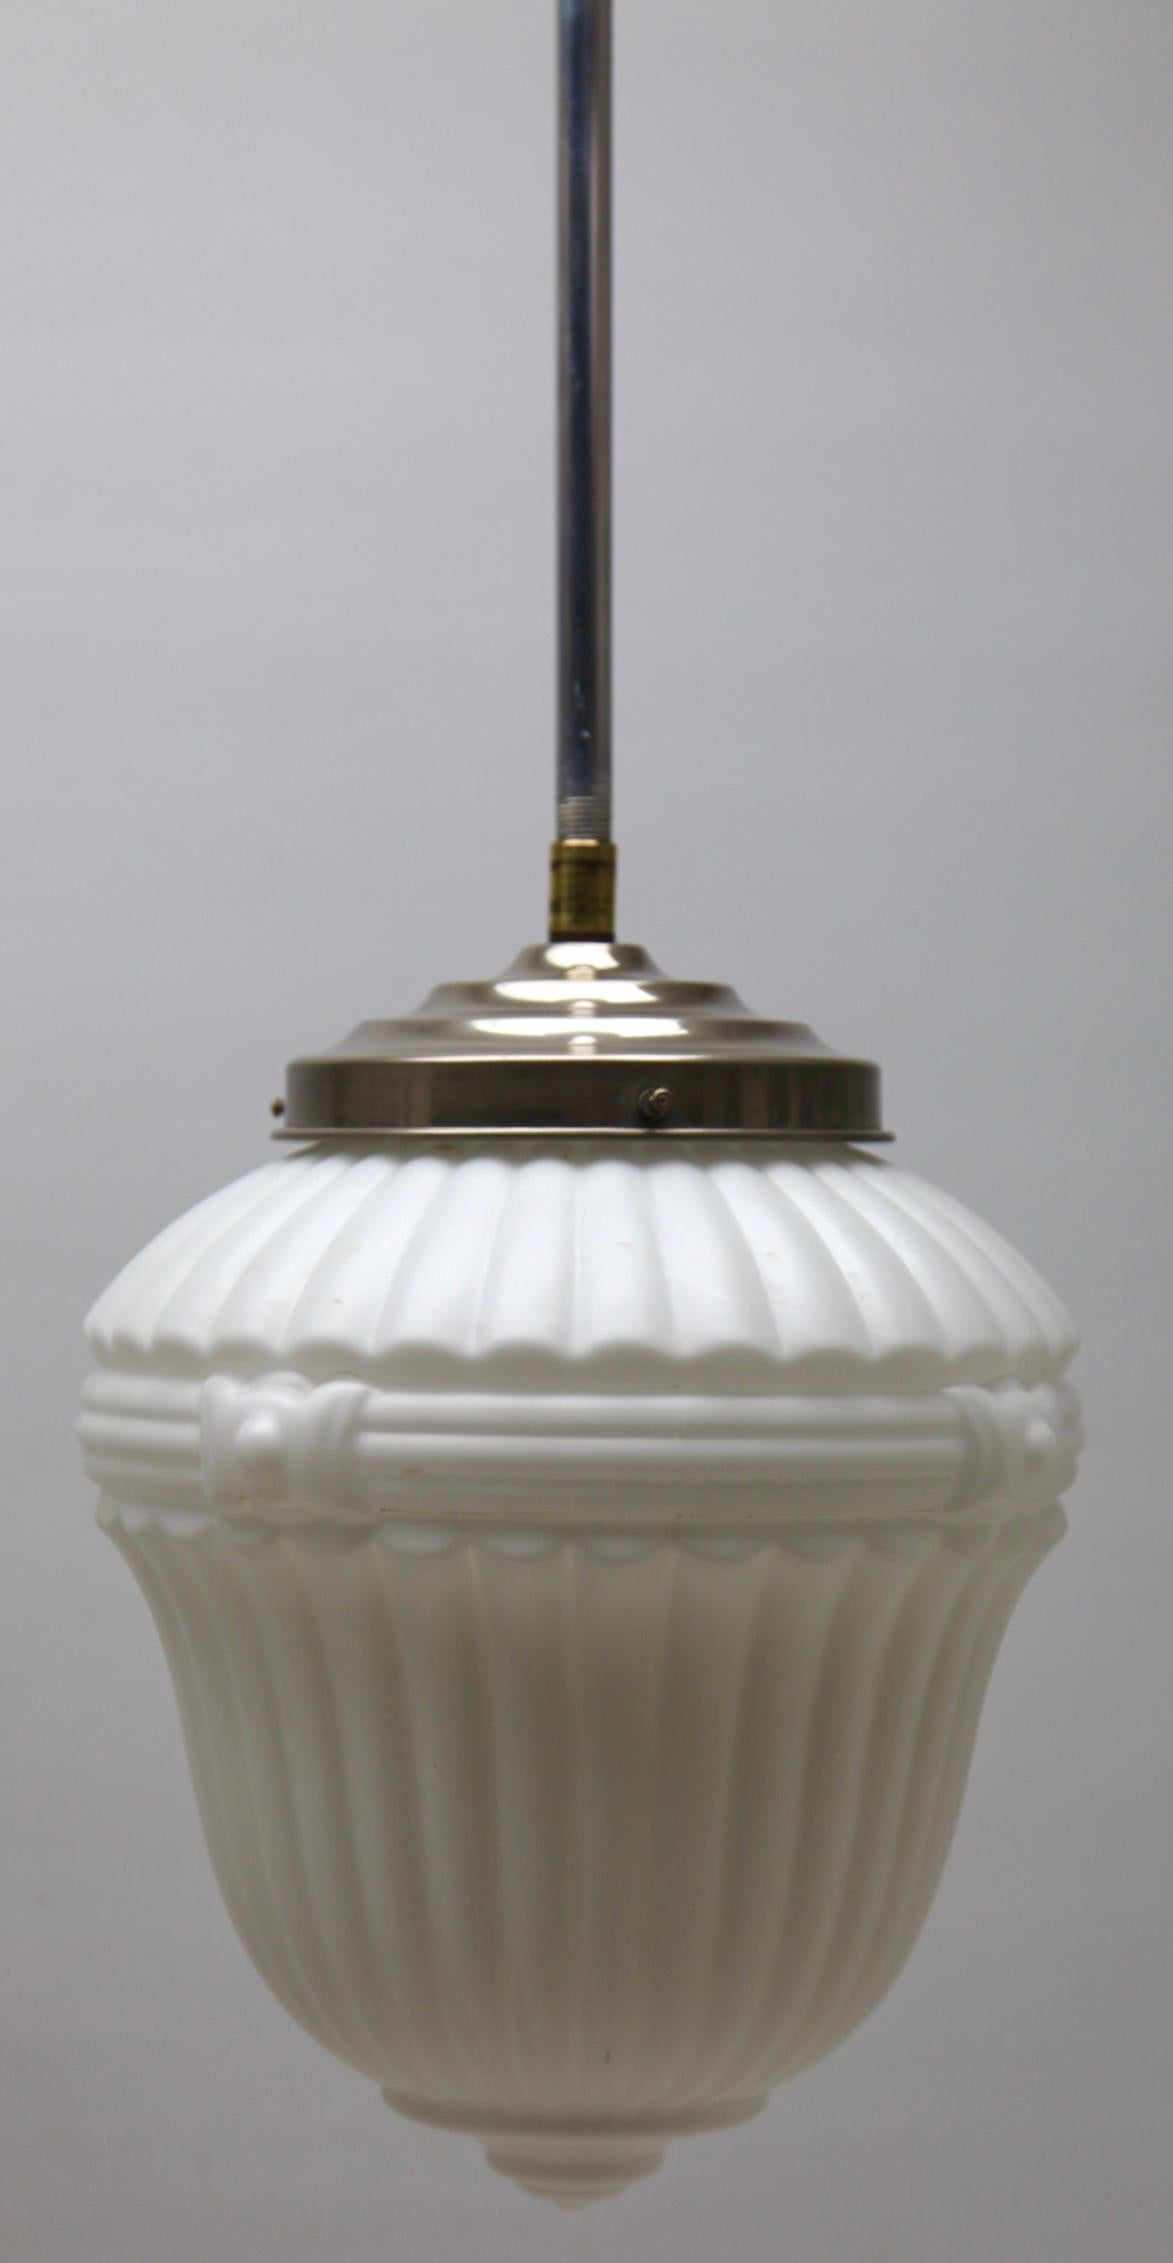 Art Deco Scailmont Pendant Lamp with a Opaline Shade and Chrome Fittings, 1930s, Belgium For Sale